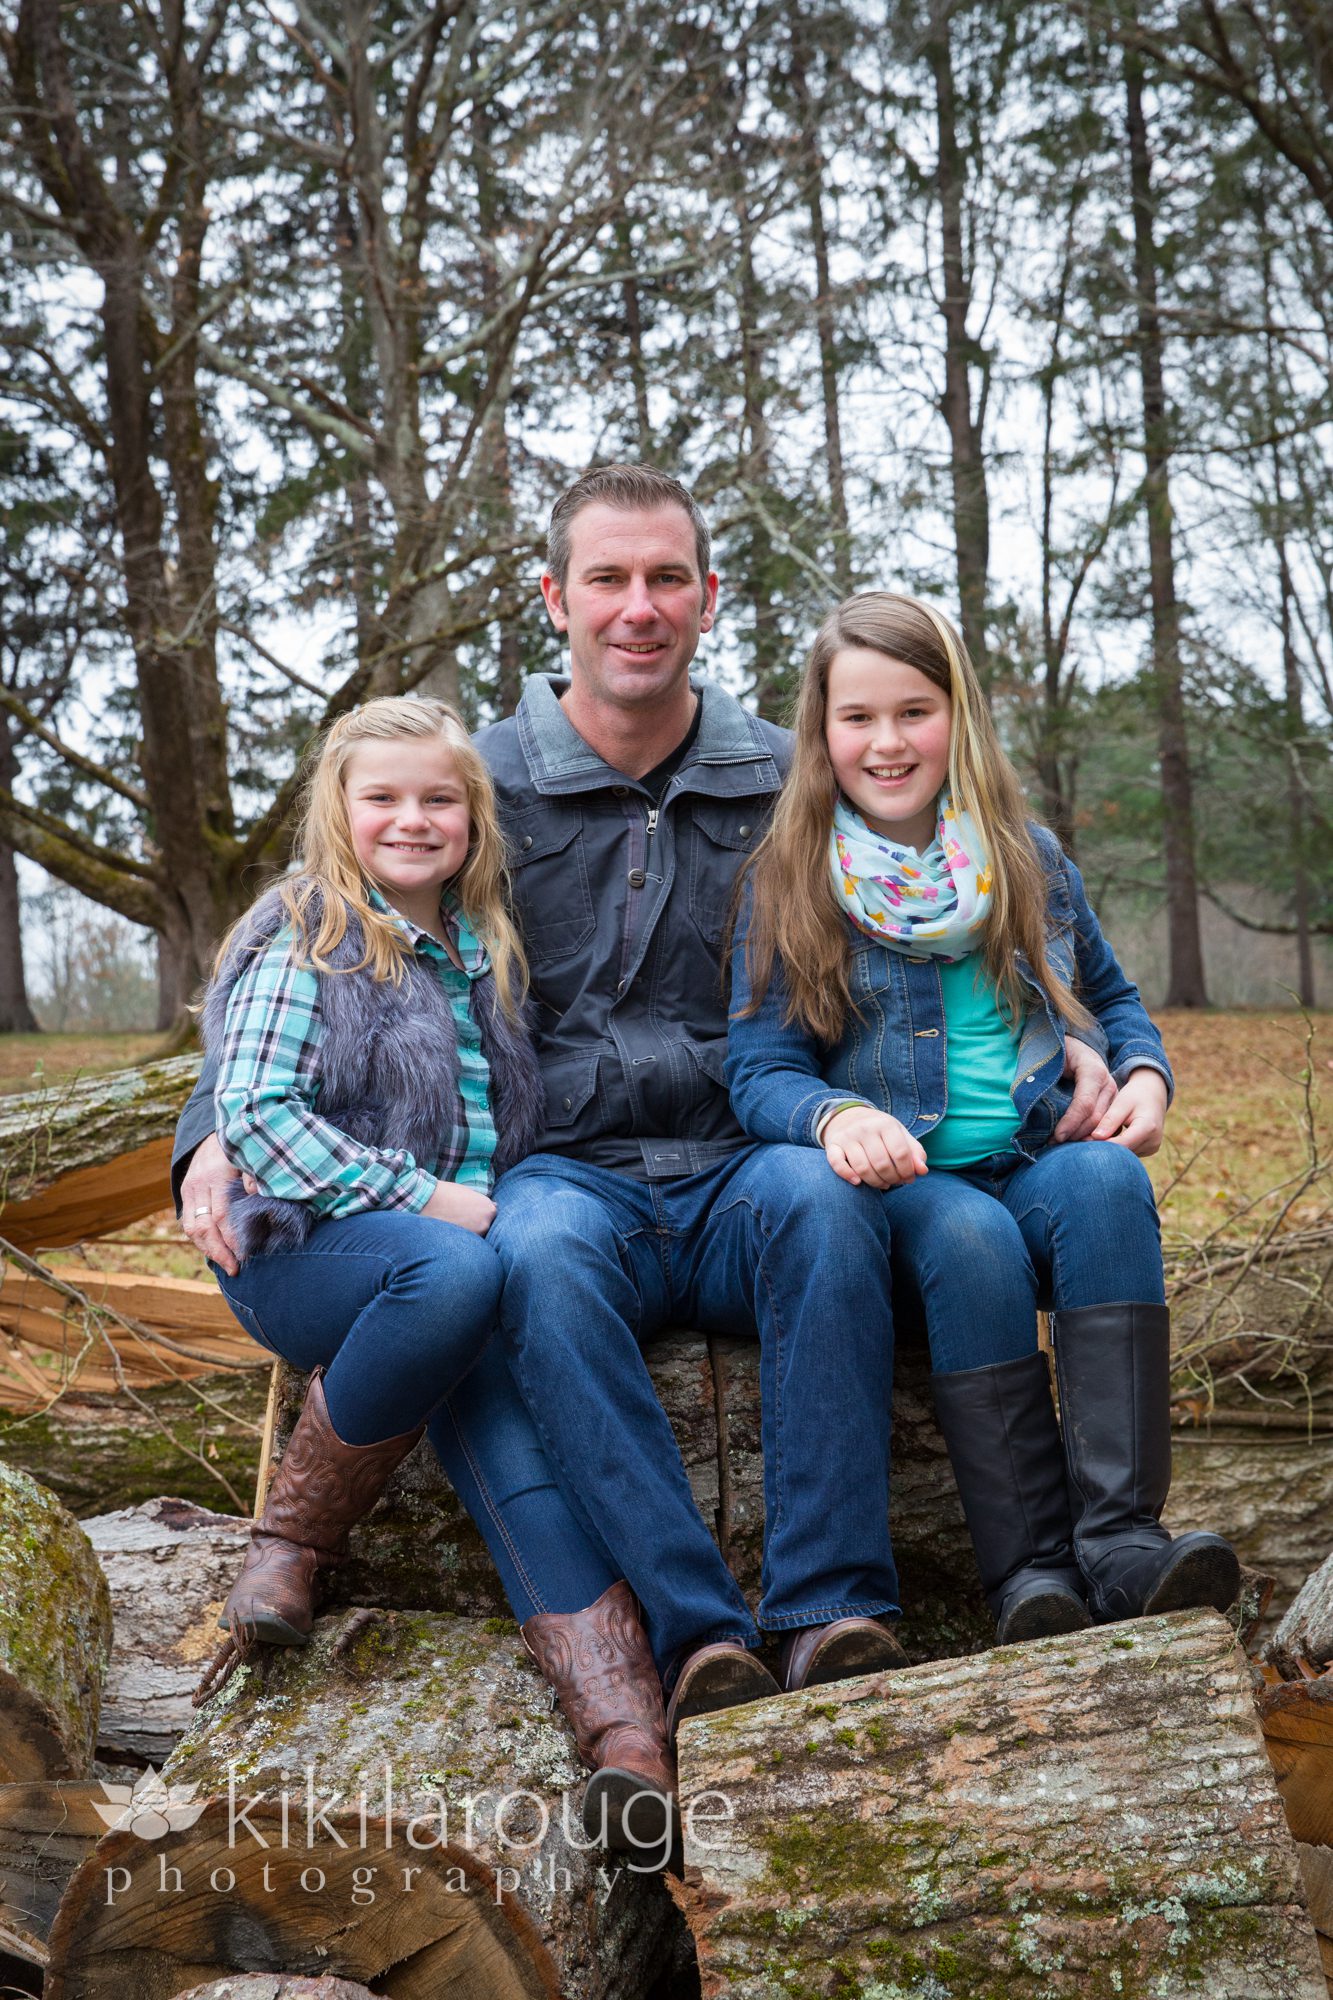 Dad sitting on log with two daughters